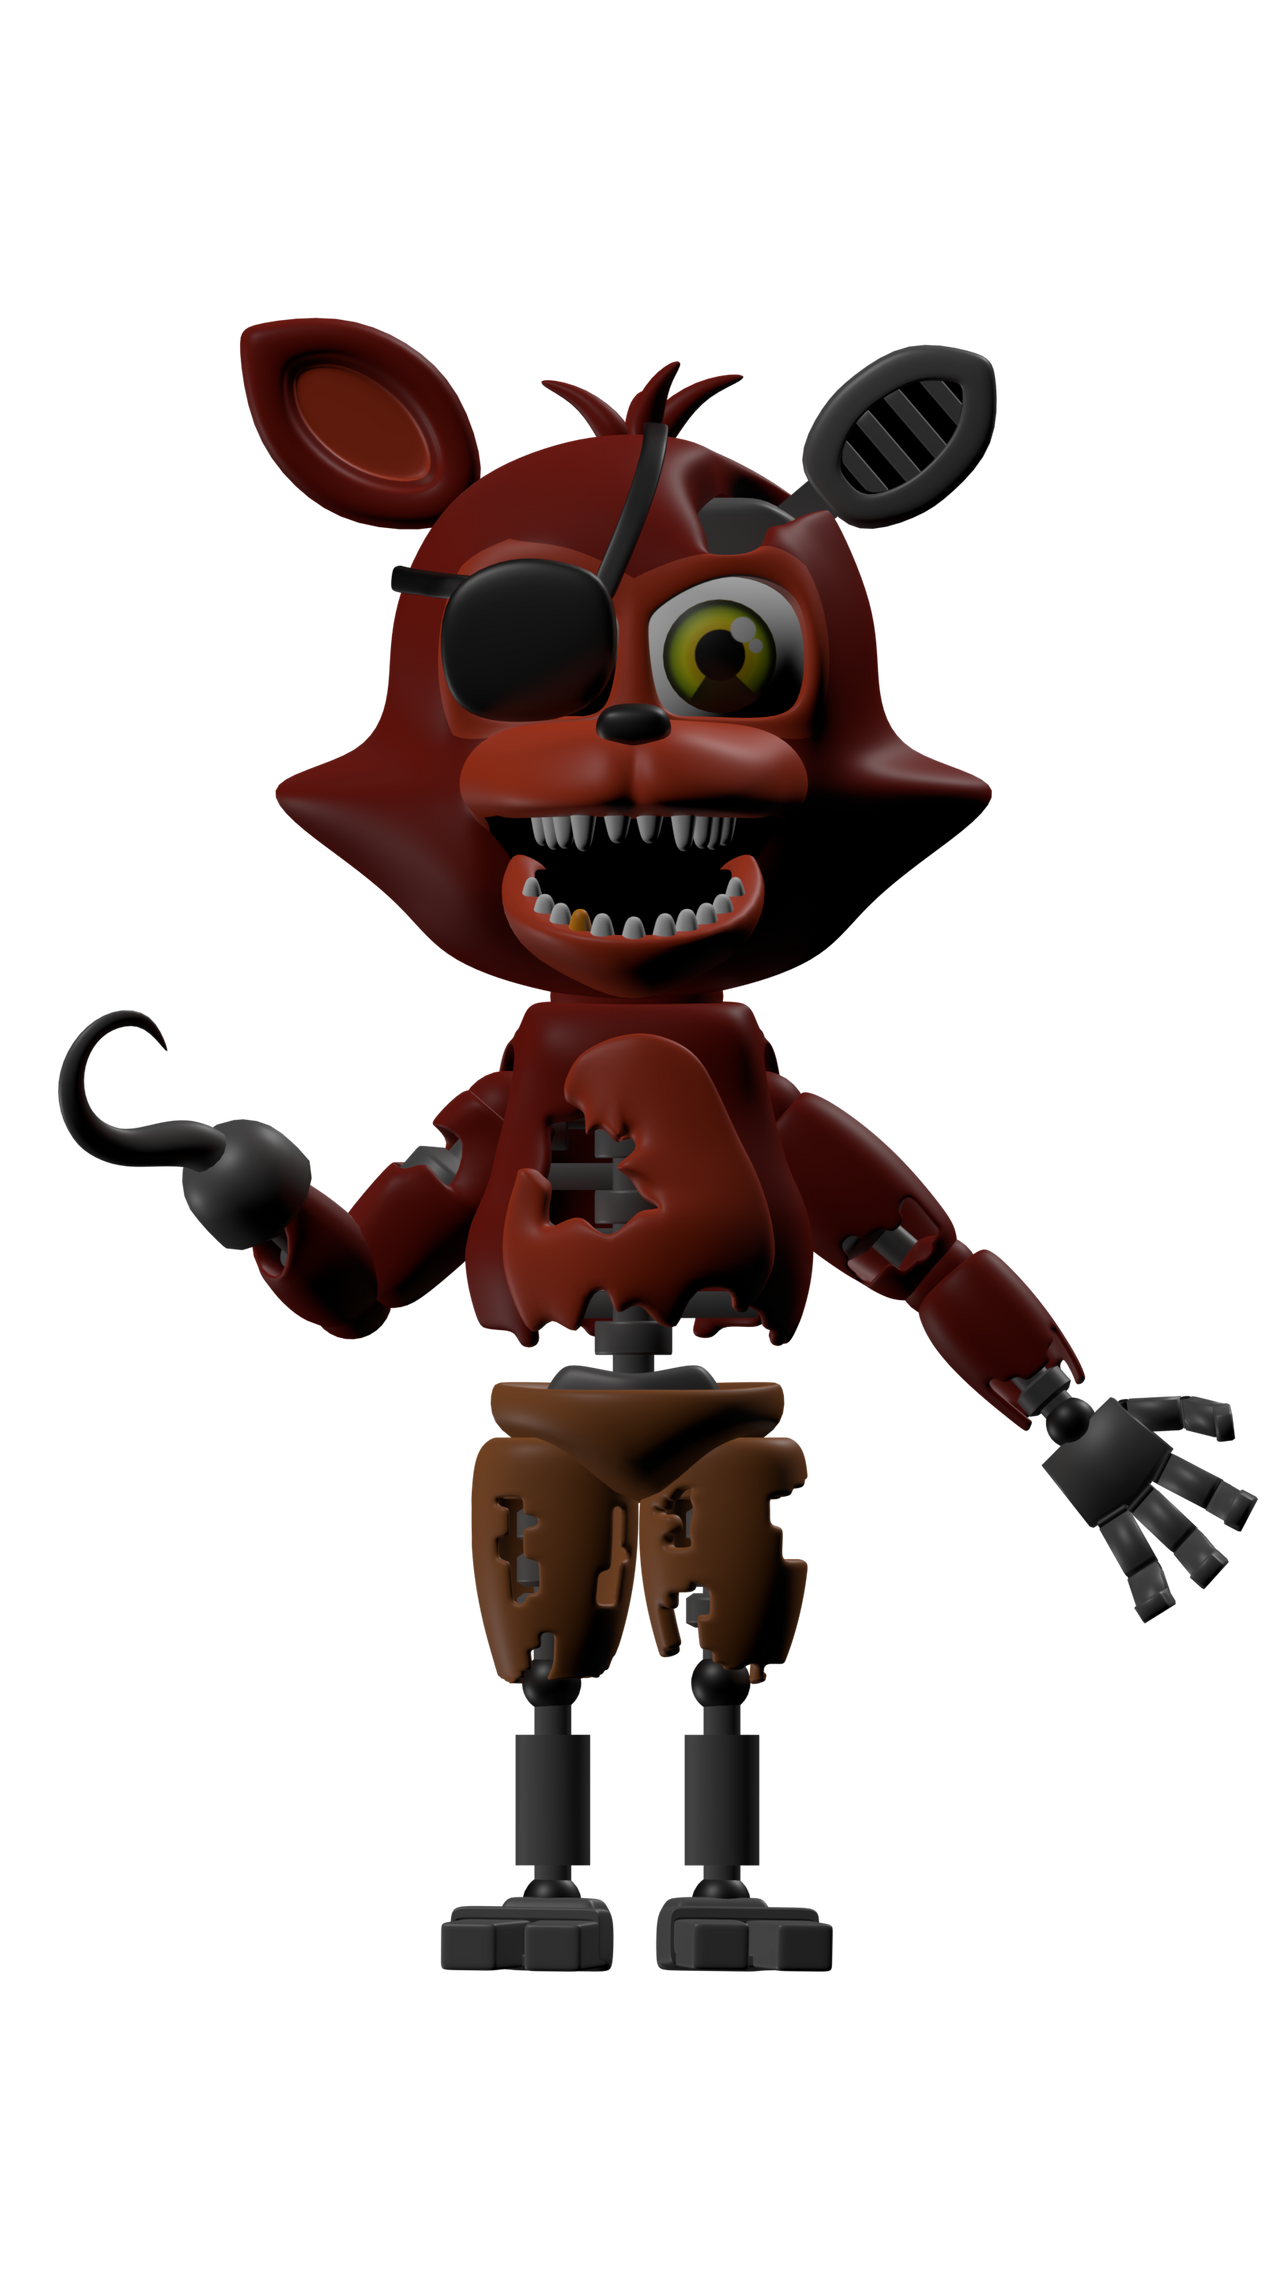 Withered Foxy by thatboyoSFM on DeviantArt